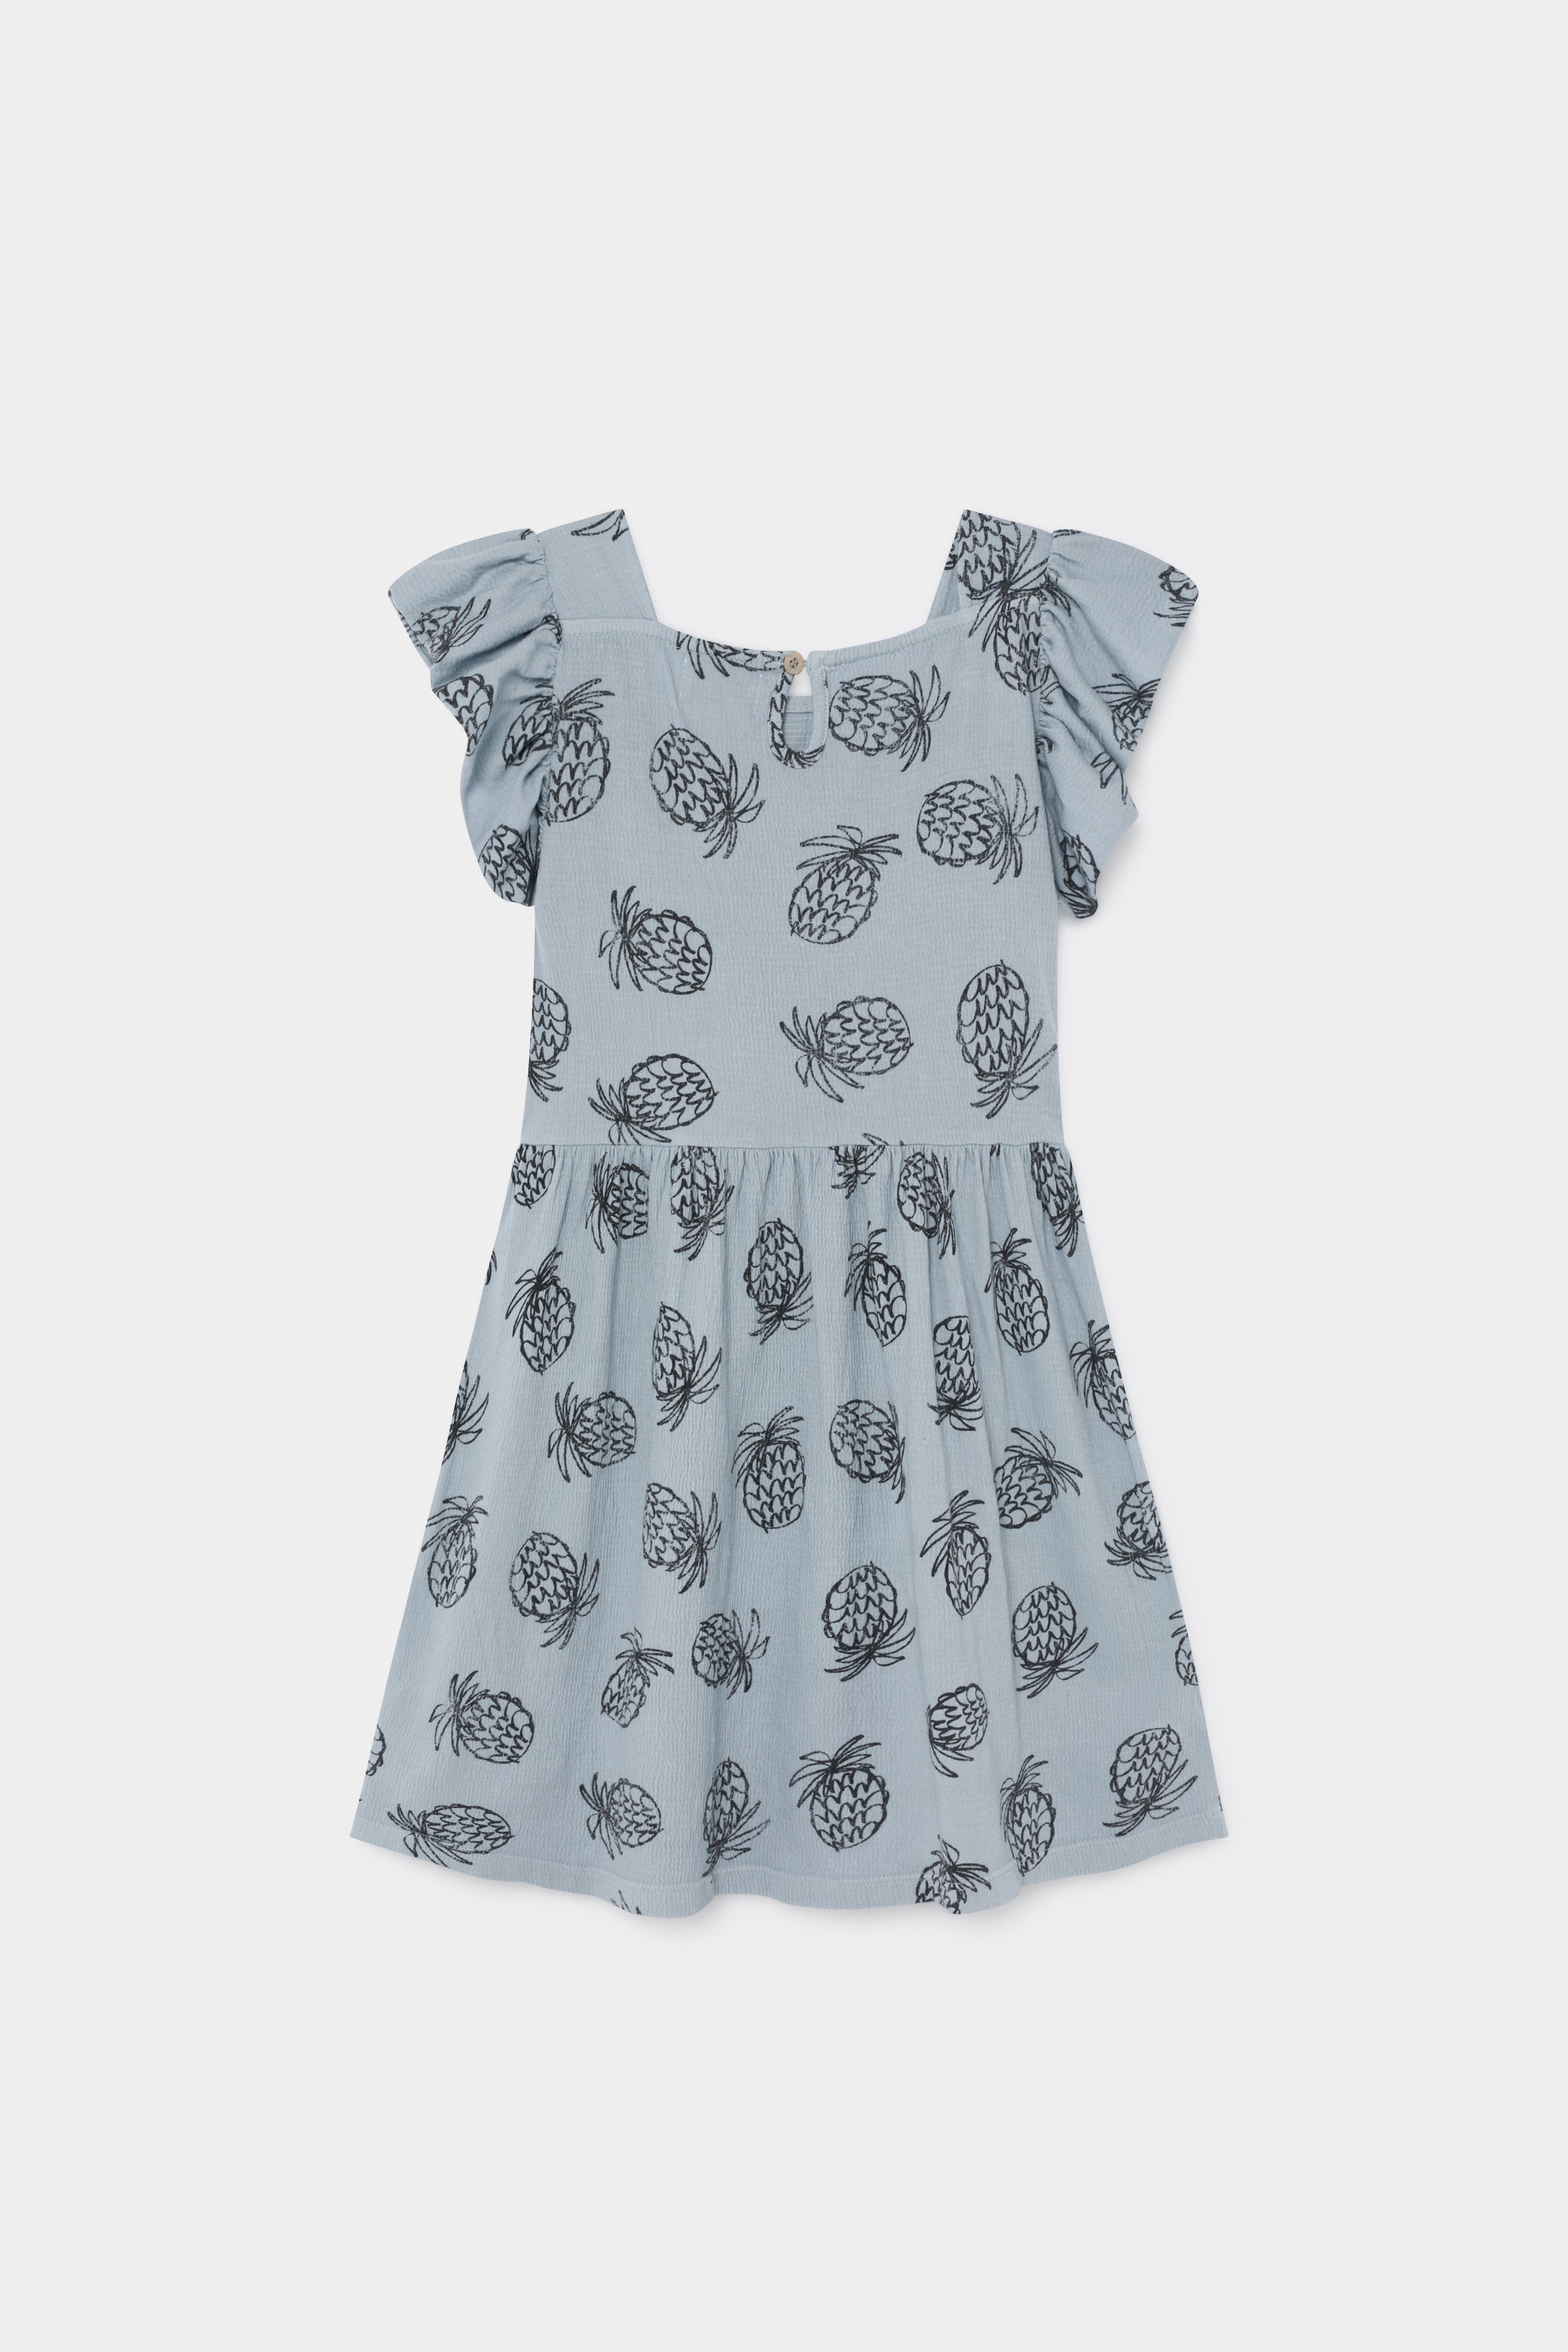 Bobo Choses All Over Pineapples Jersey Ruffle Dress